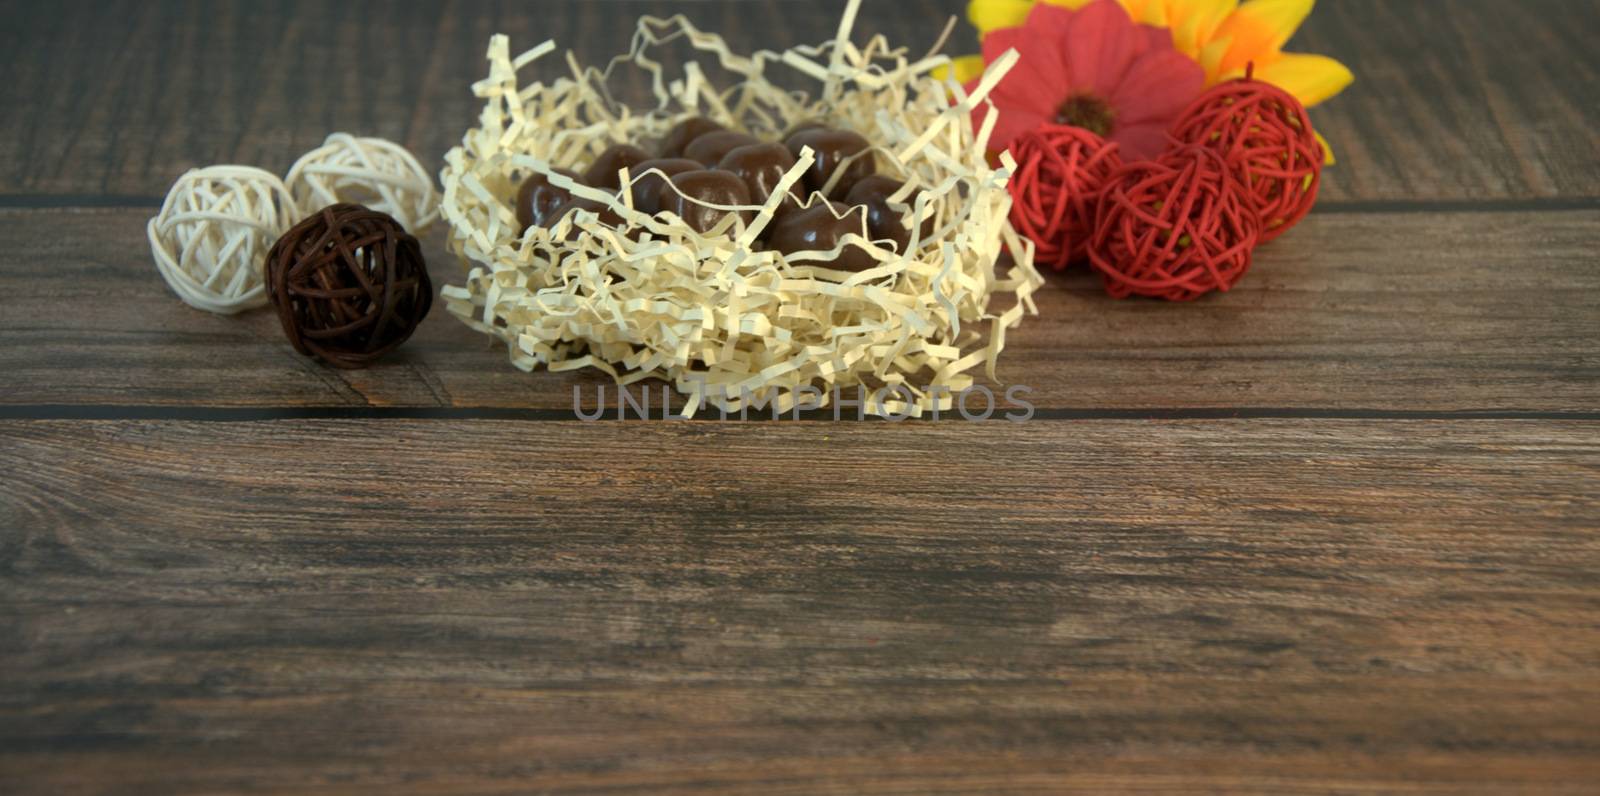 Round chocolates in a nest of straw, multicolored decorative balls and flower buds on a wooden table. by alexey_zheltukhin